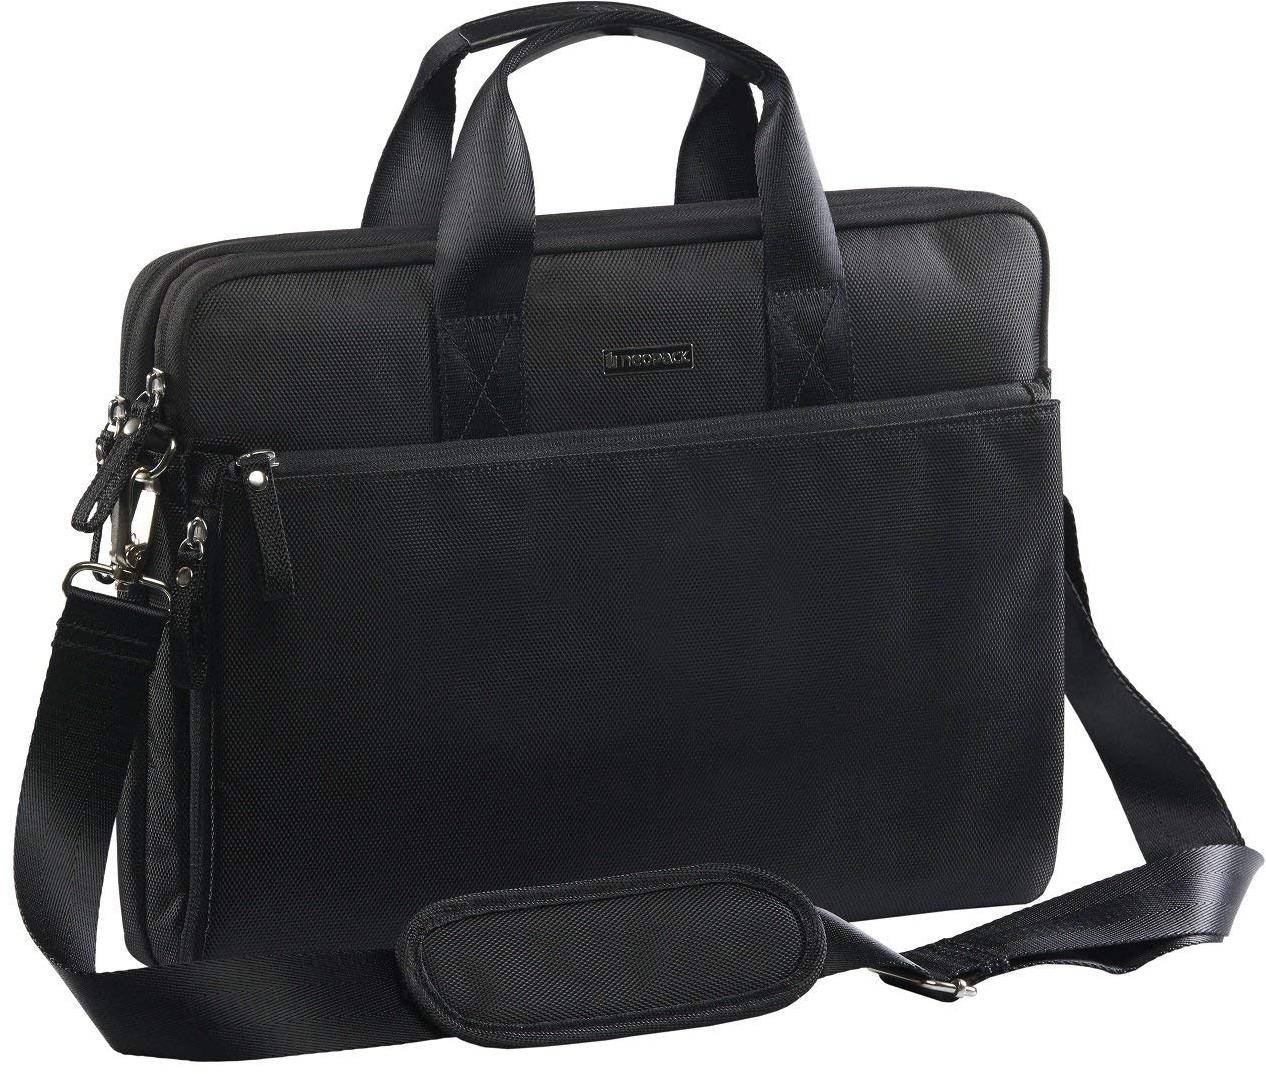 Neopack Slimline Bag 13.3 inches for Laptops and Macbooks zoom image